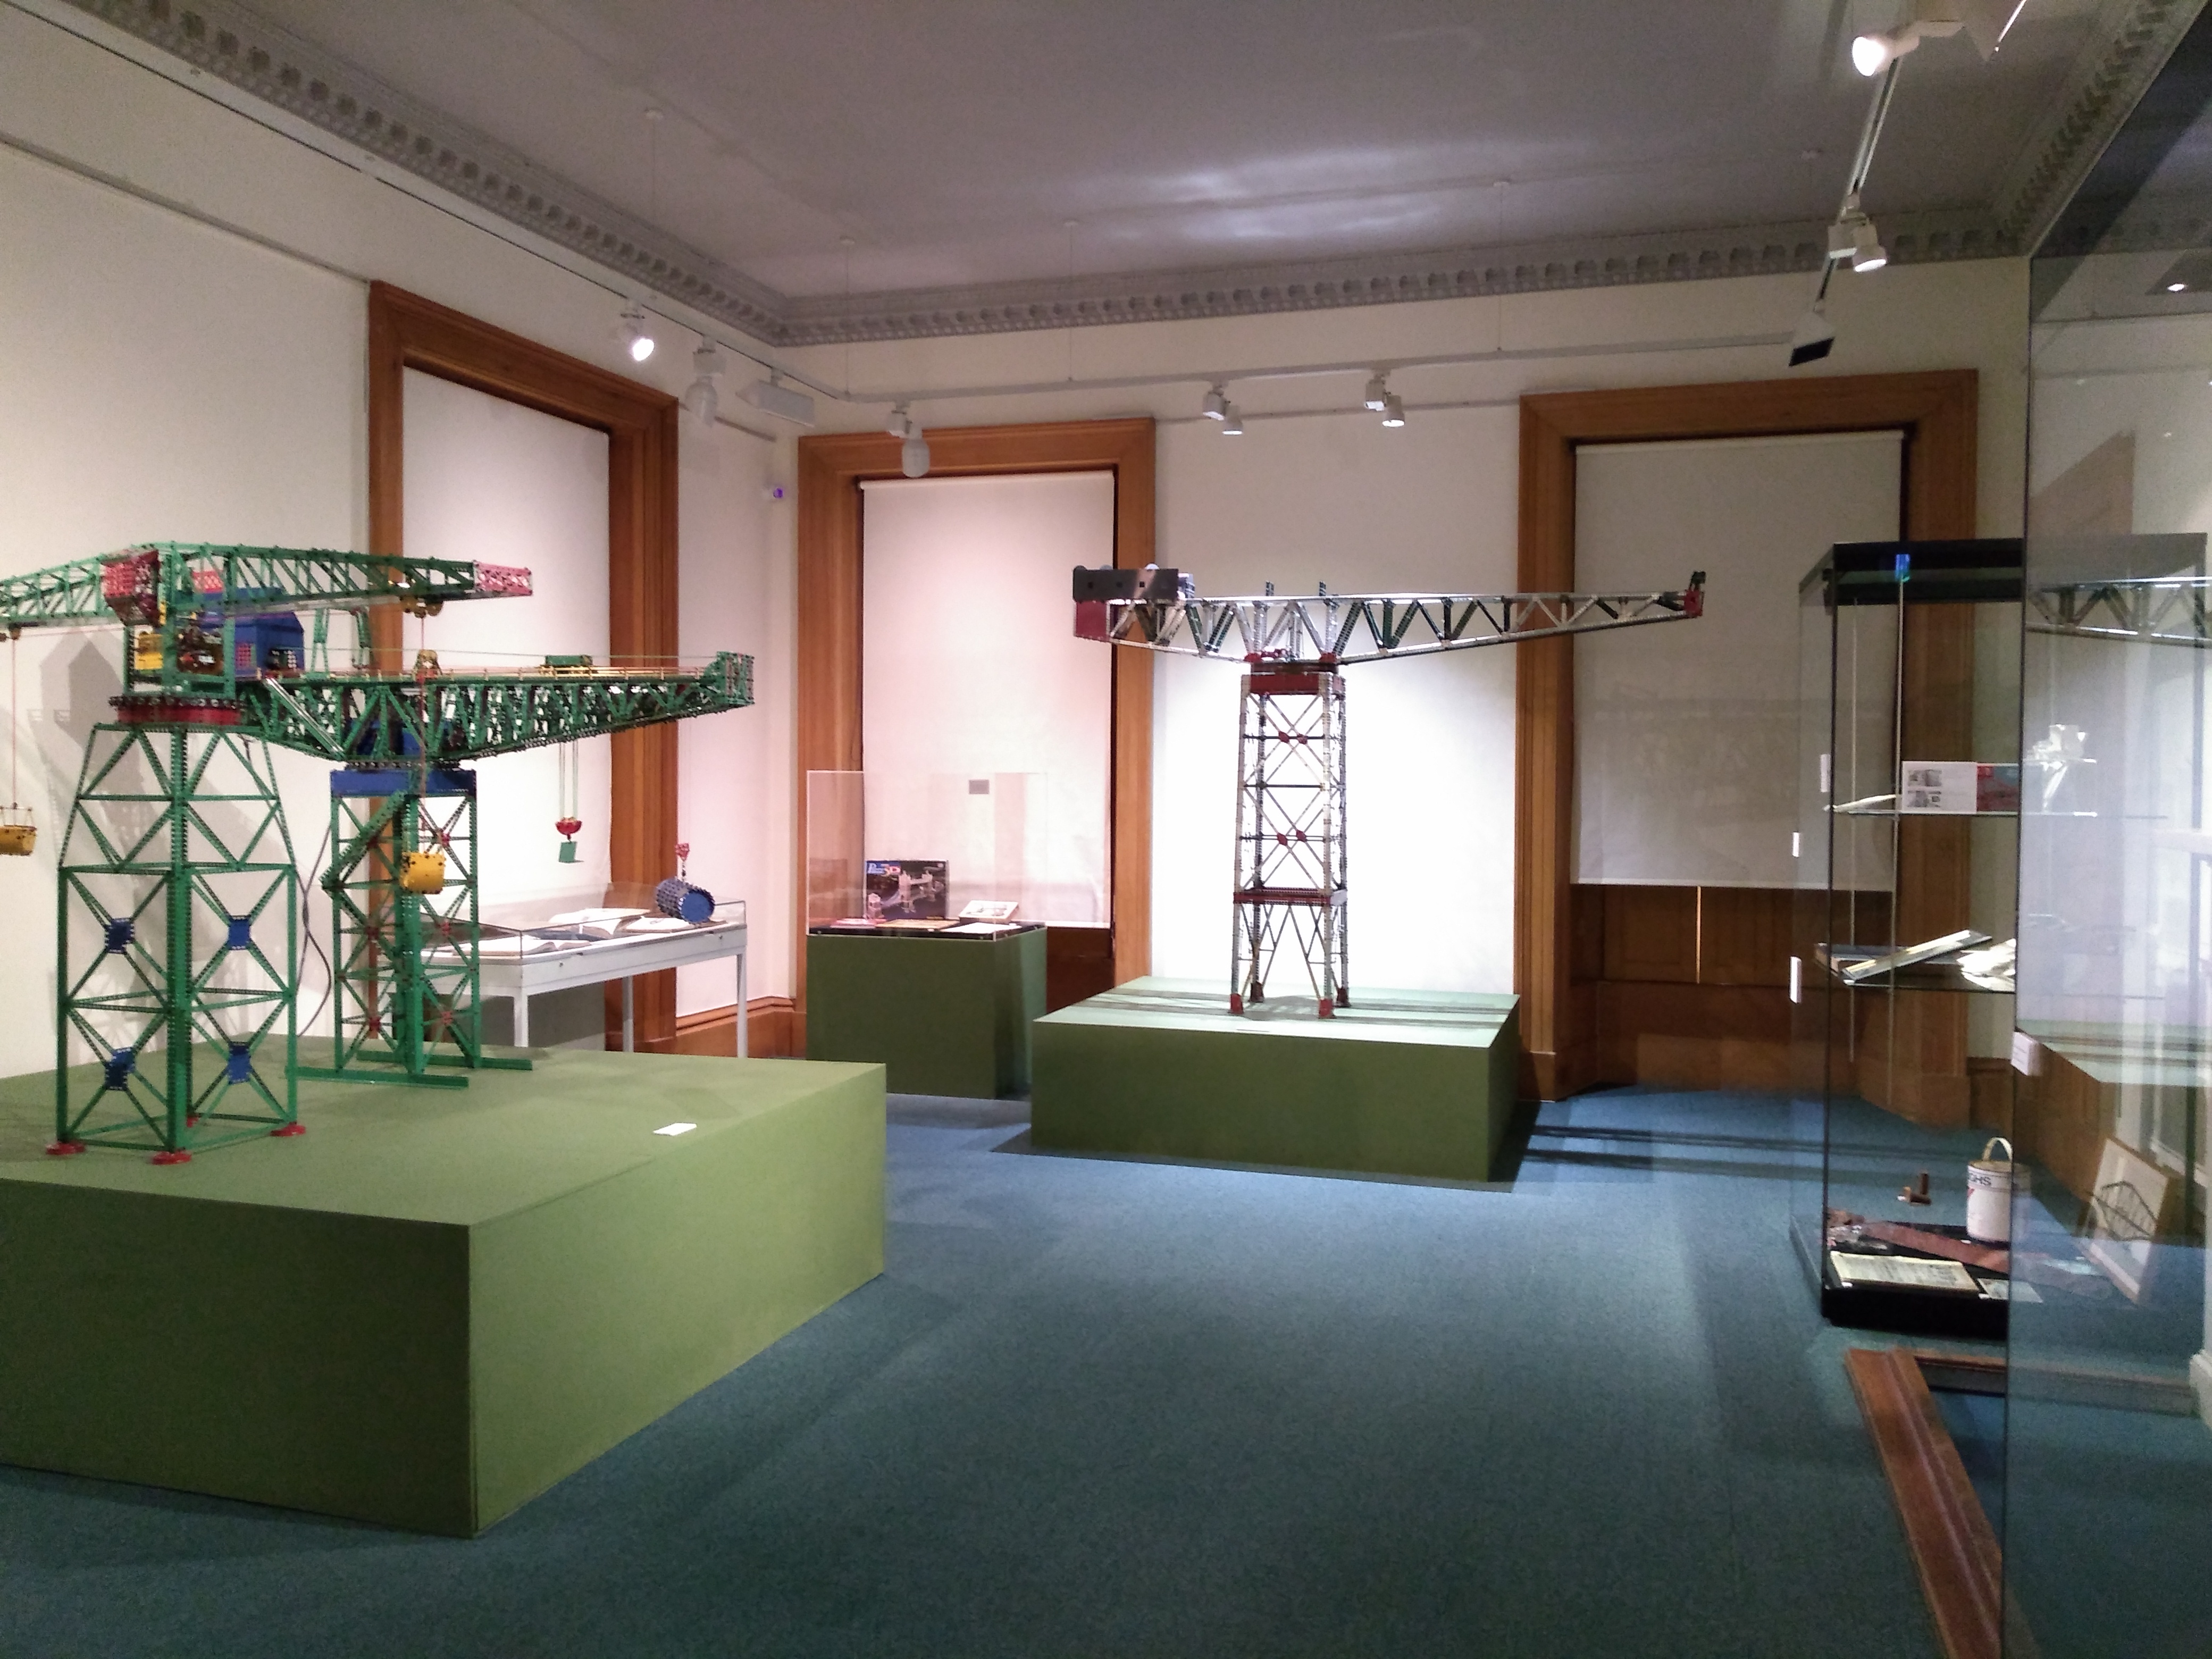 View of gallery with three large Meccano models of cranes and display cases filled with Arrol-related artefacts